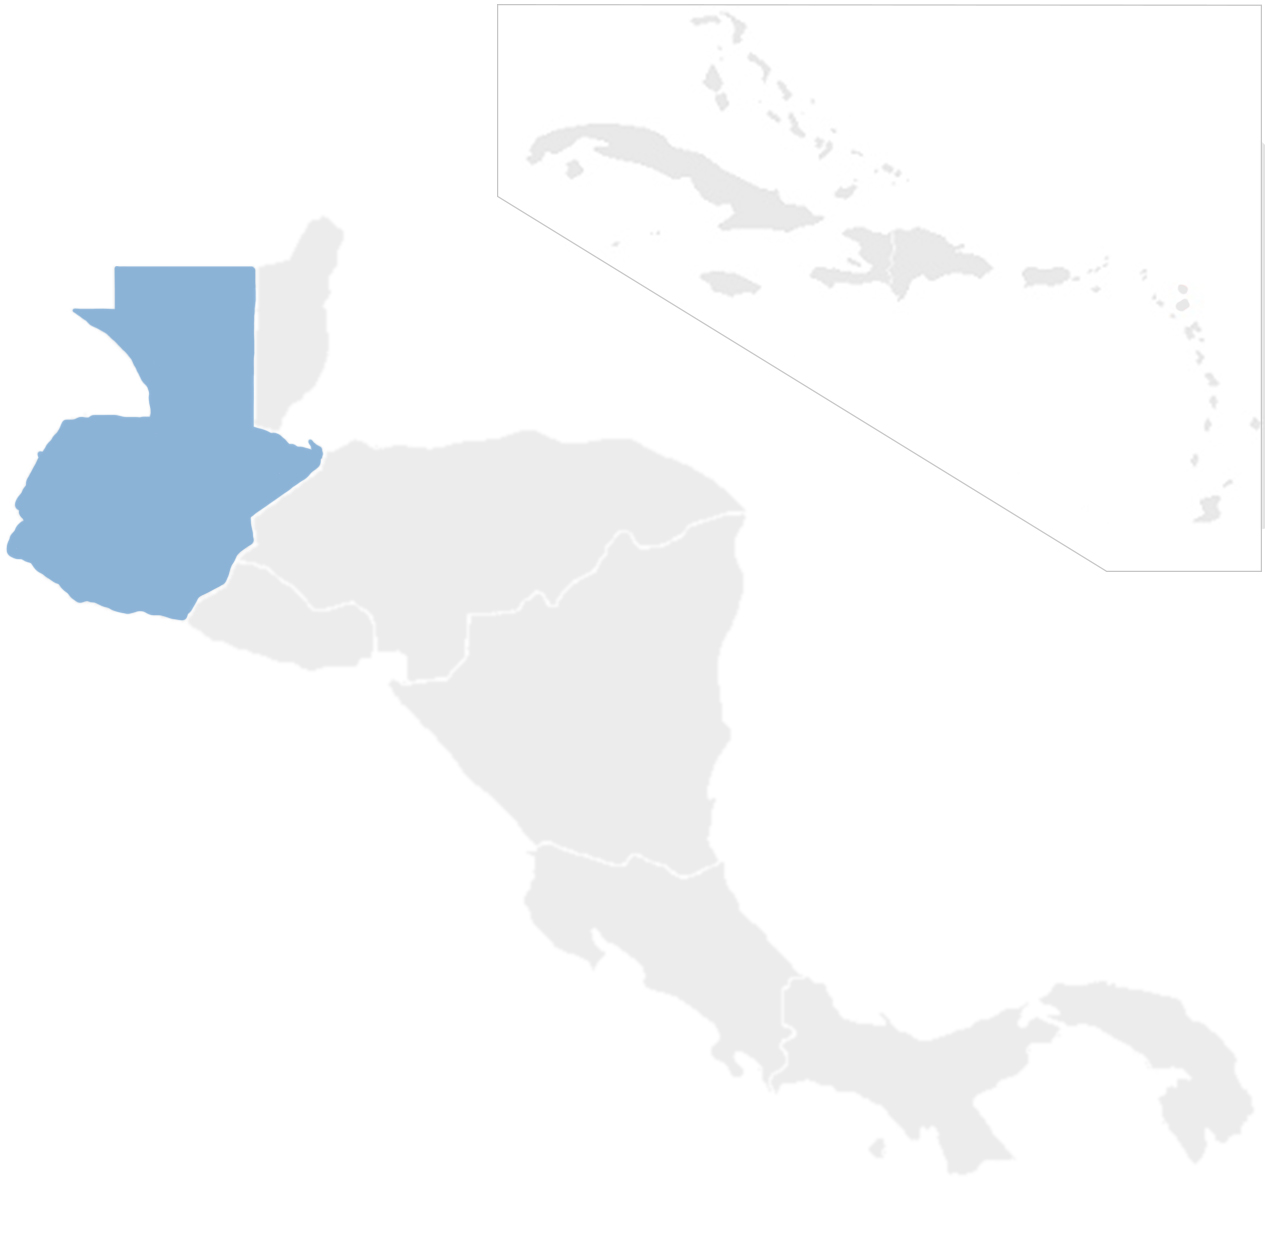 Gray map of Central America and the Caribbean with Guatemala in blue